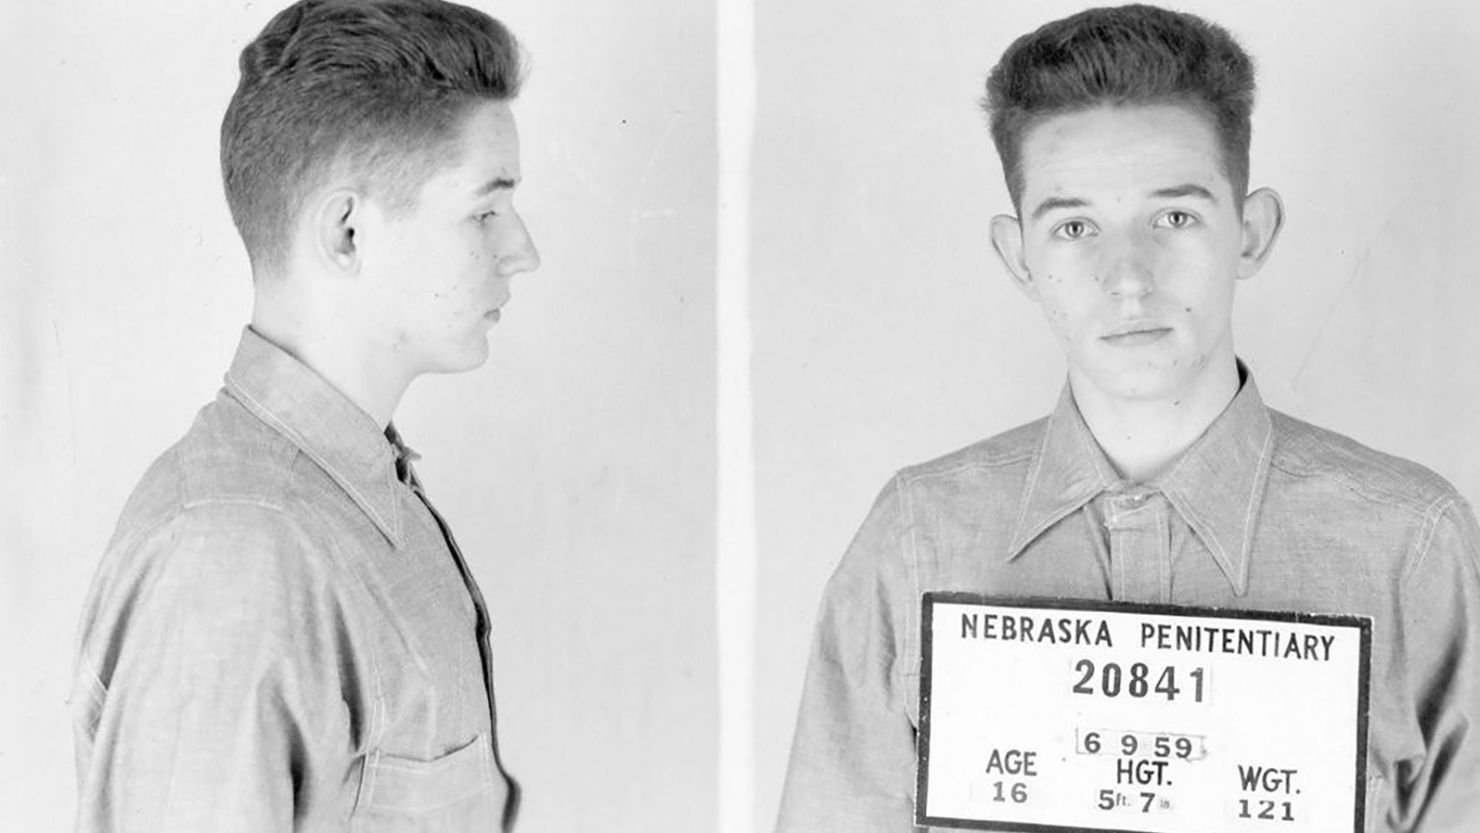 William Leslie Arnold was sentenced to life in prison in 1959 for murdering his parents.